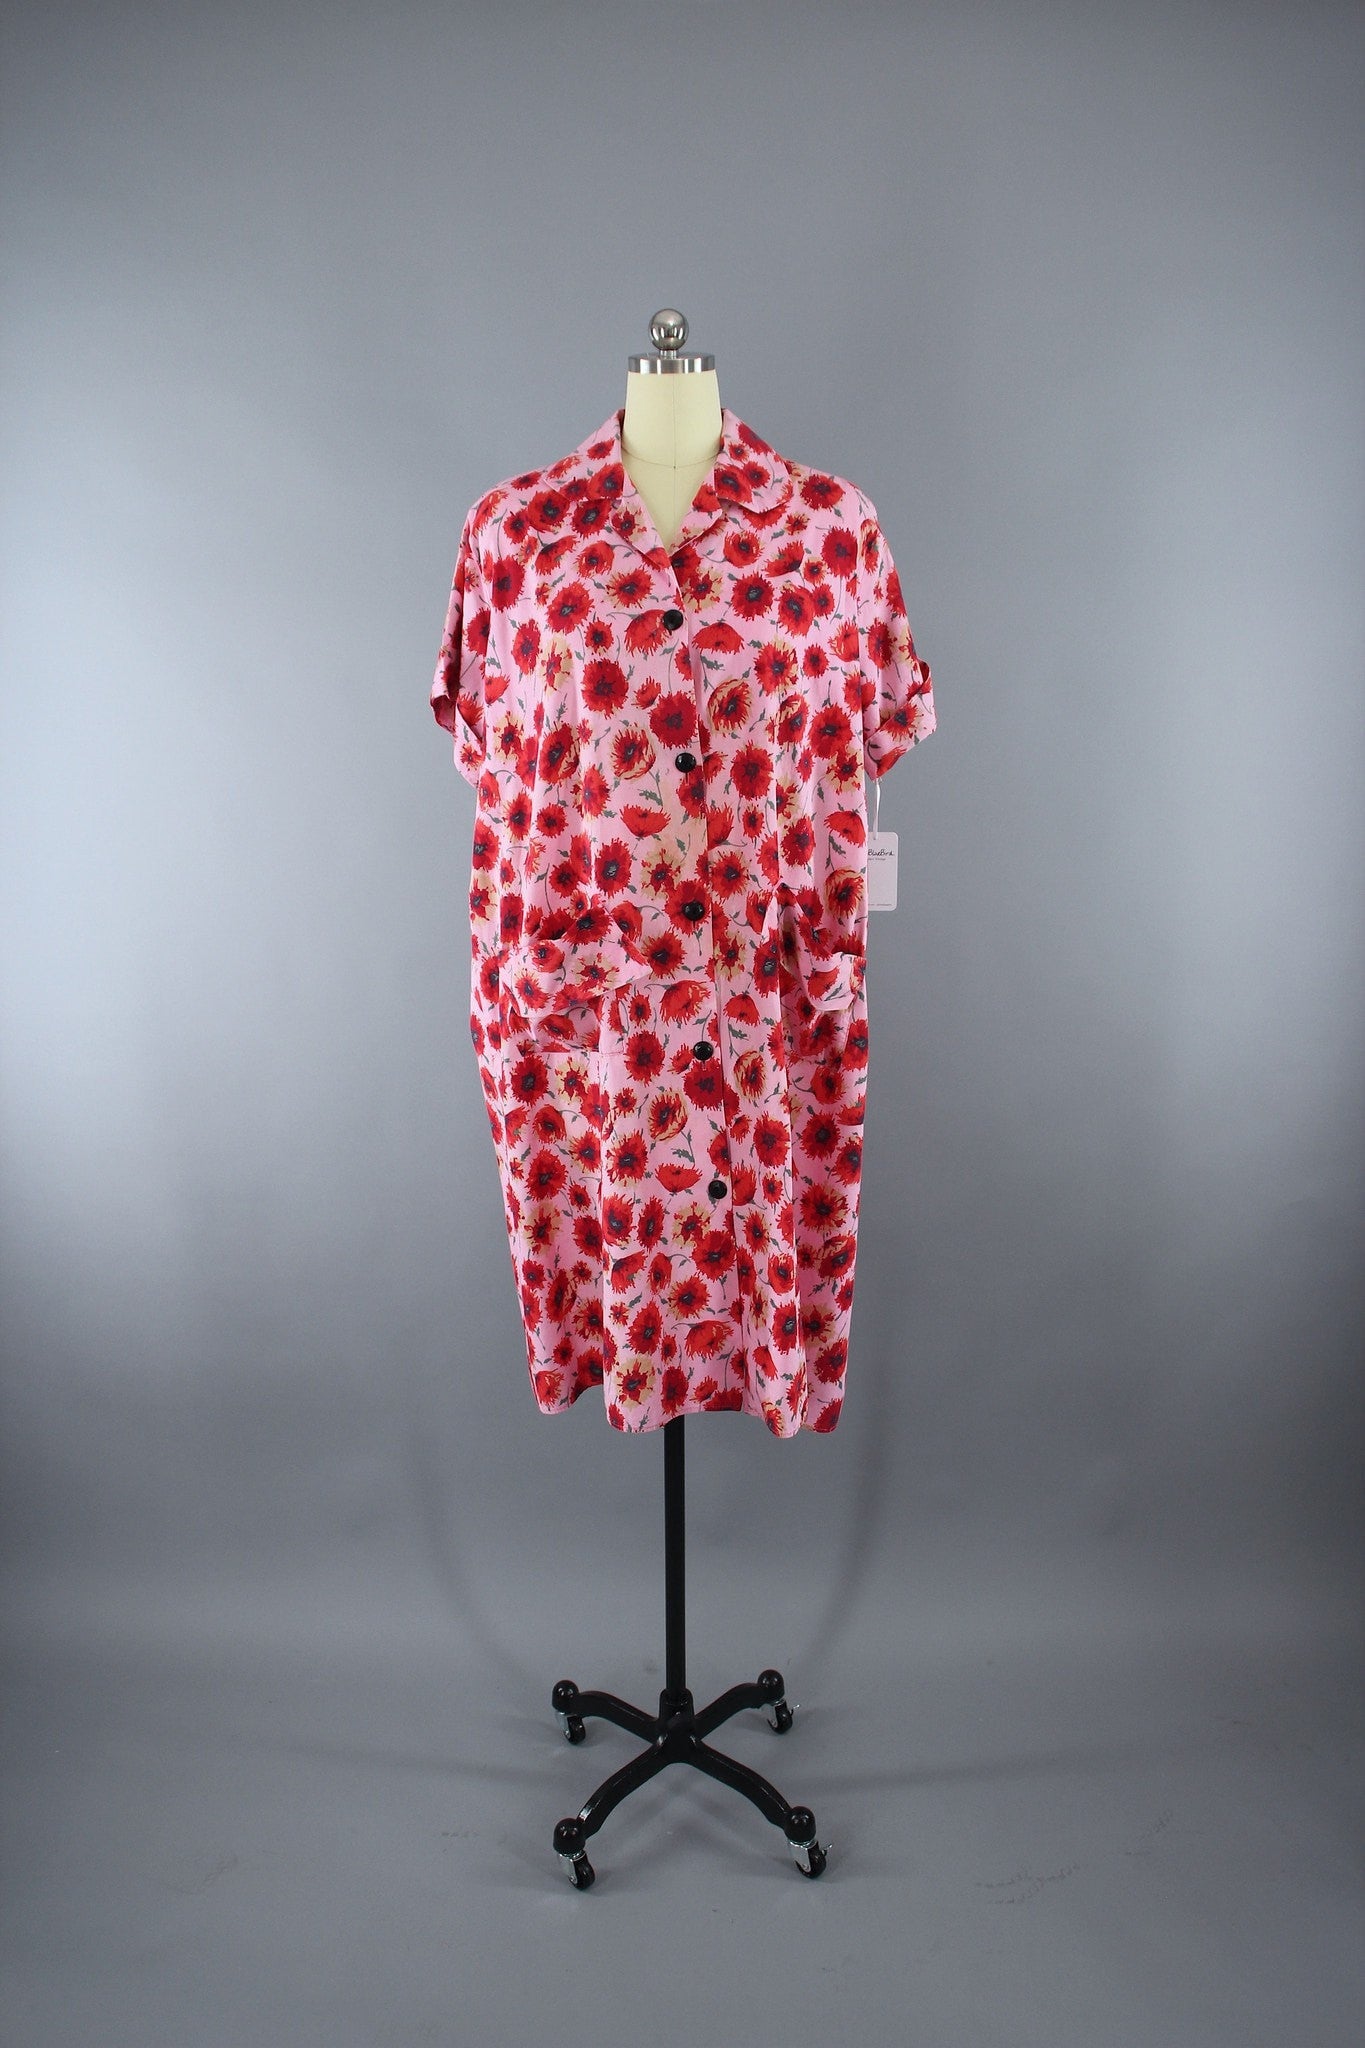 Vintage 1950s Nightgown / Maternity Dress in Pink & Red Poppies - ThisBlueBird